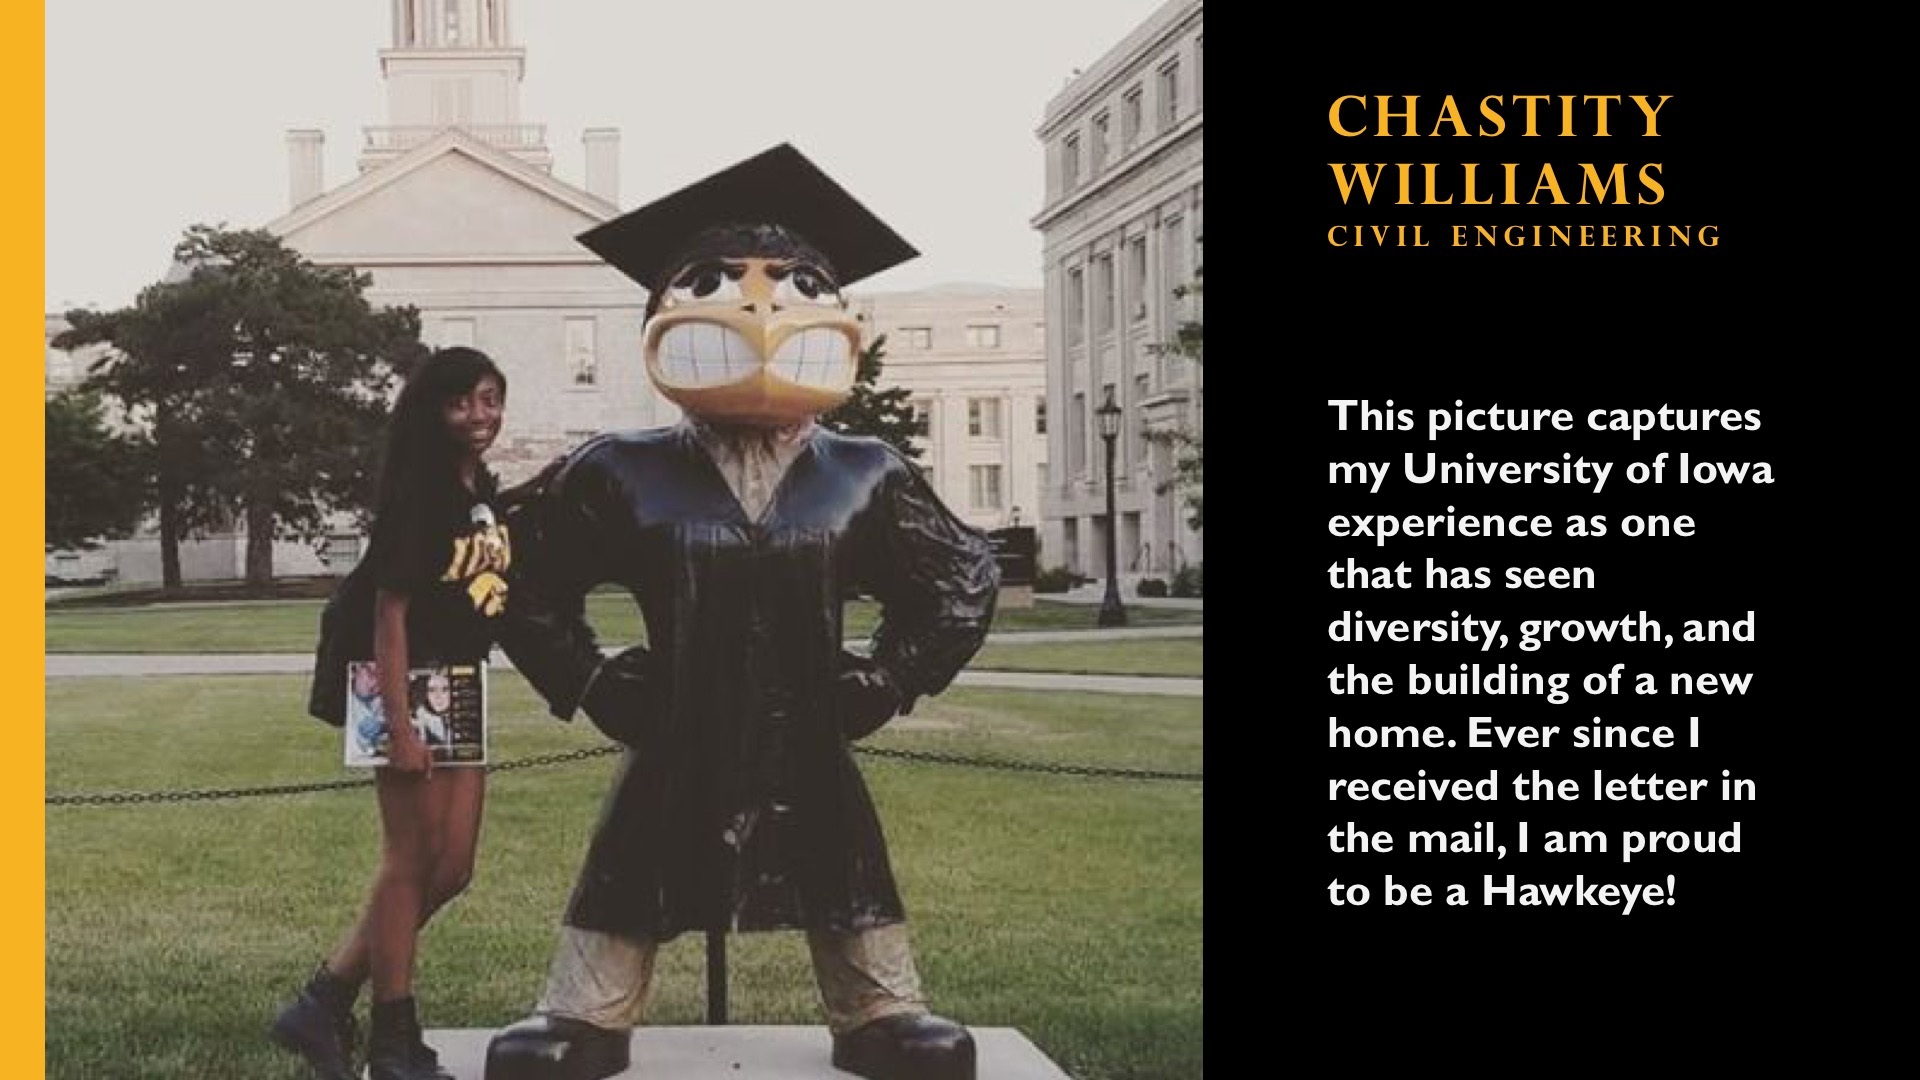 Chastity Williams. Civil Engineering. This picture captures my University of Iowa experience as one that has seen diversity, growth, and the building of a new home. Ever since I received the letter in the mail, I am proud to be a Hawkeye. 